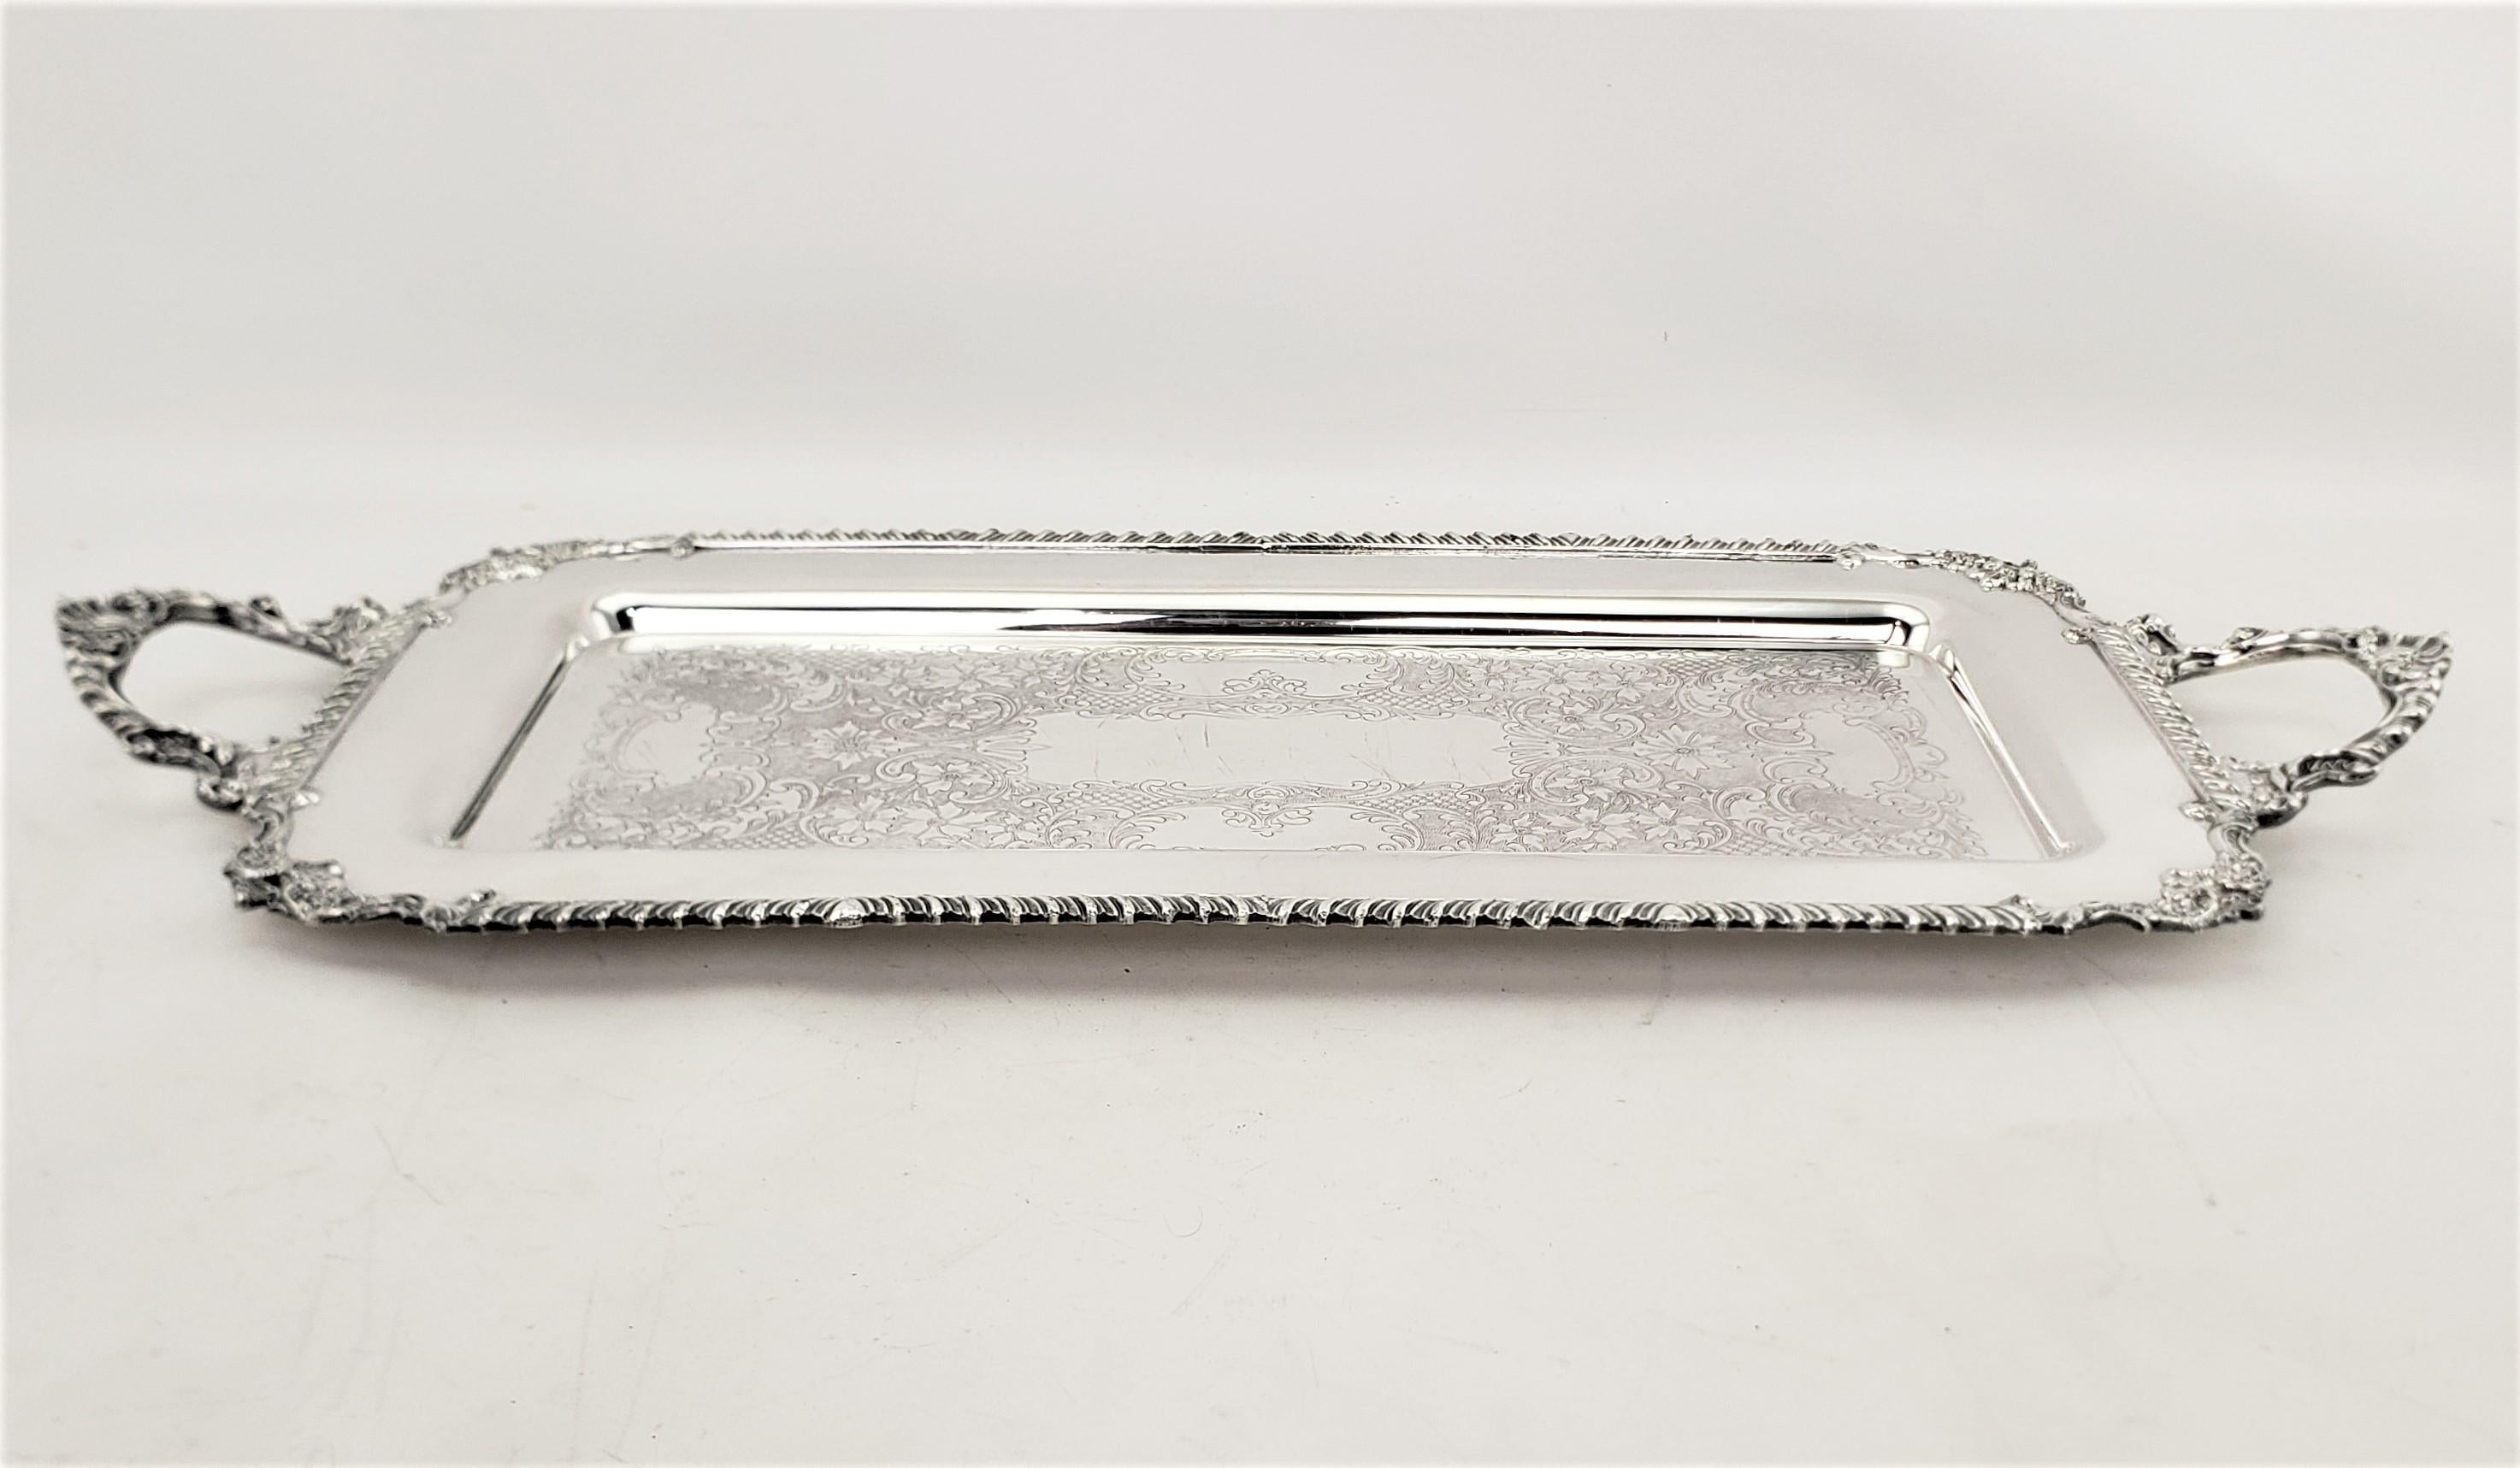 Antique Rectangular Silver Plated Serving Tray with Stylized Rope Decoration In Good Condition For Sale In Hamilton, Ontario